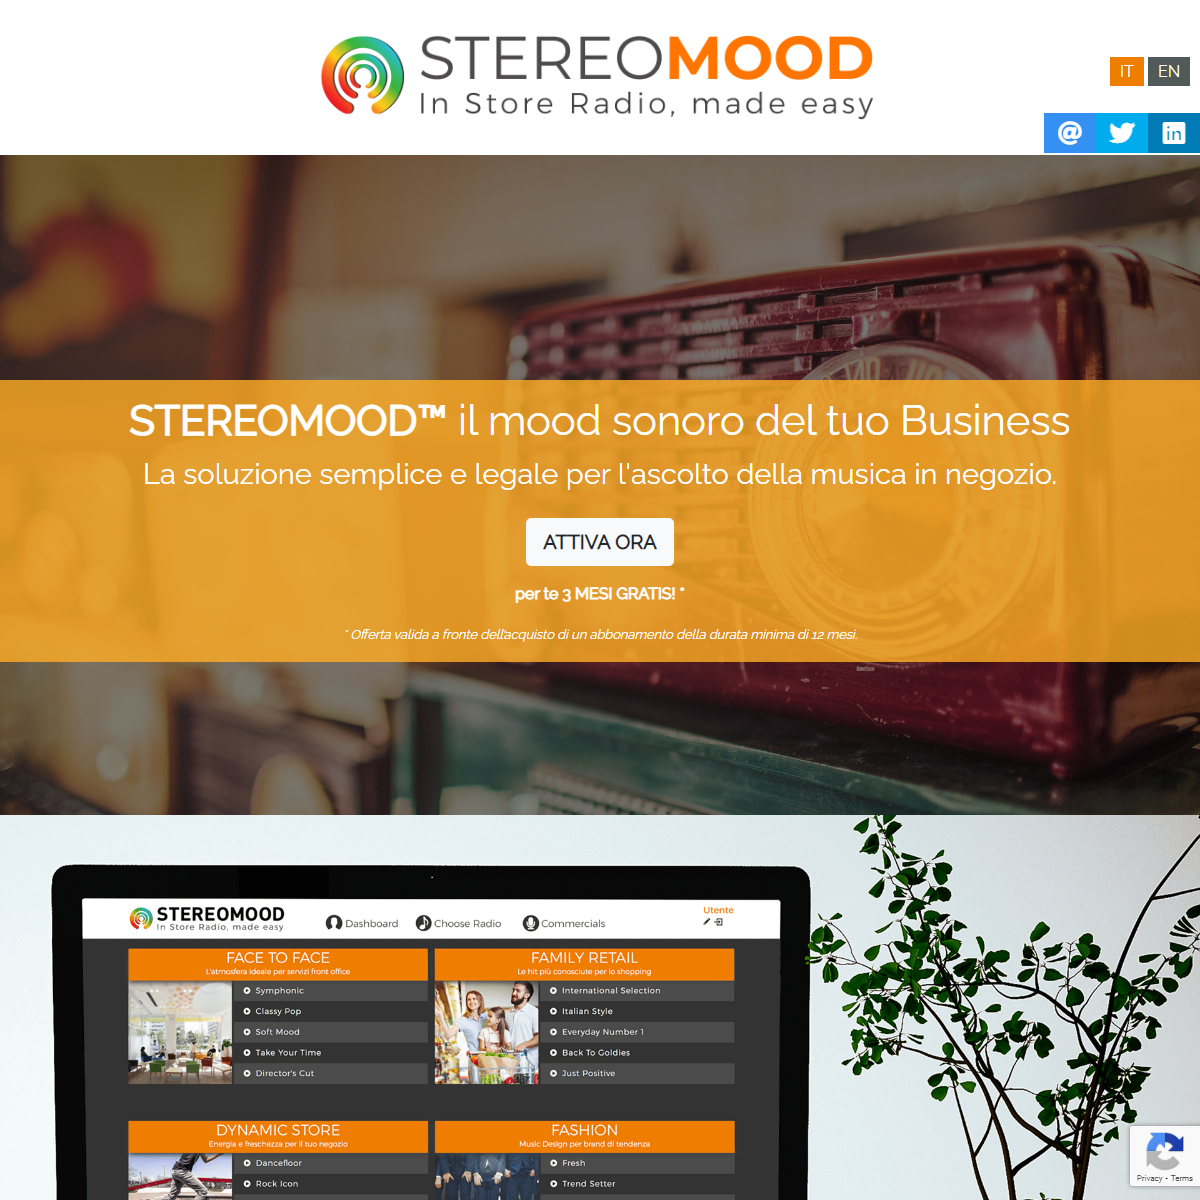 A complete backup of https://www.stereomood.com/